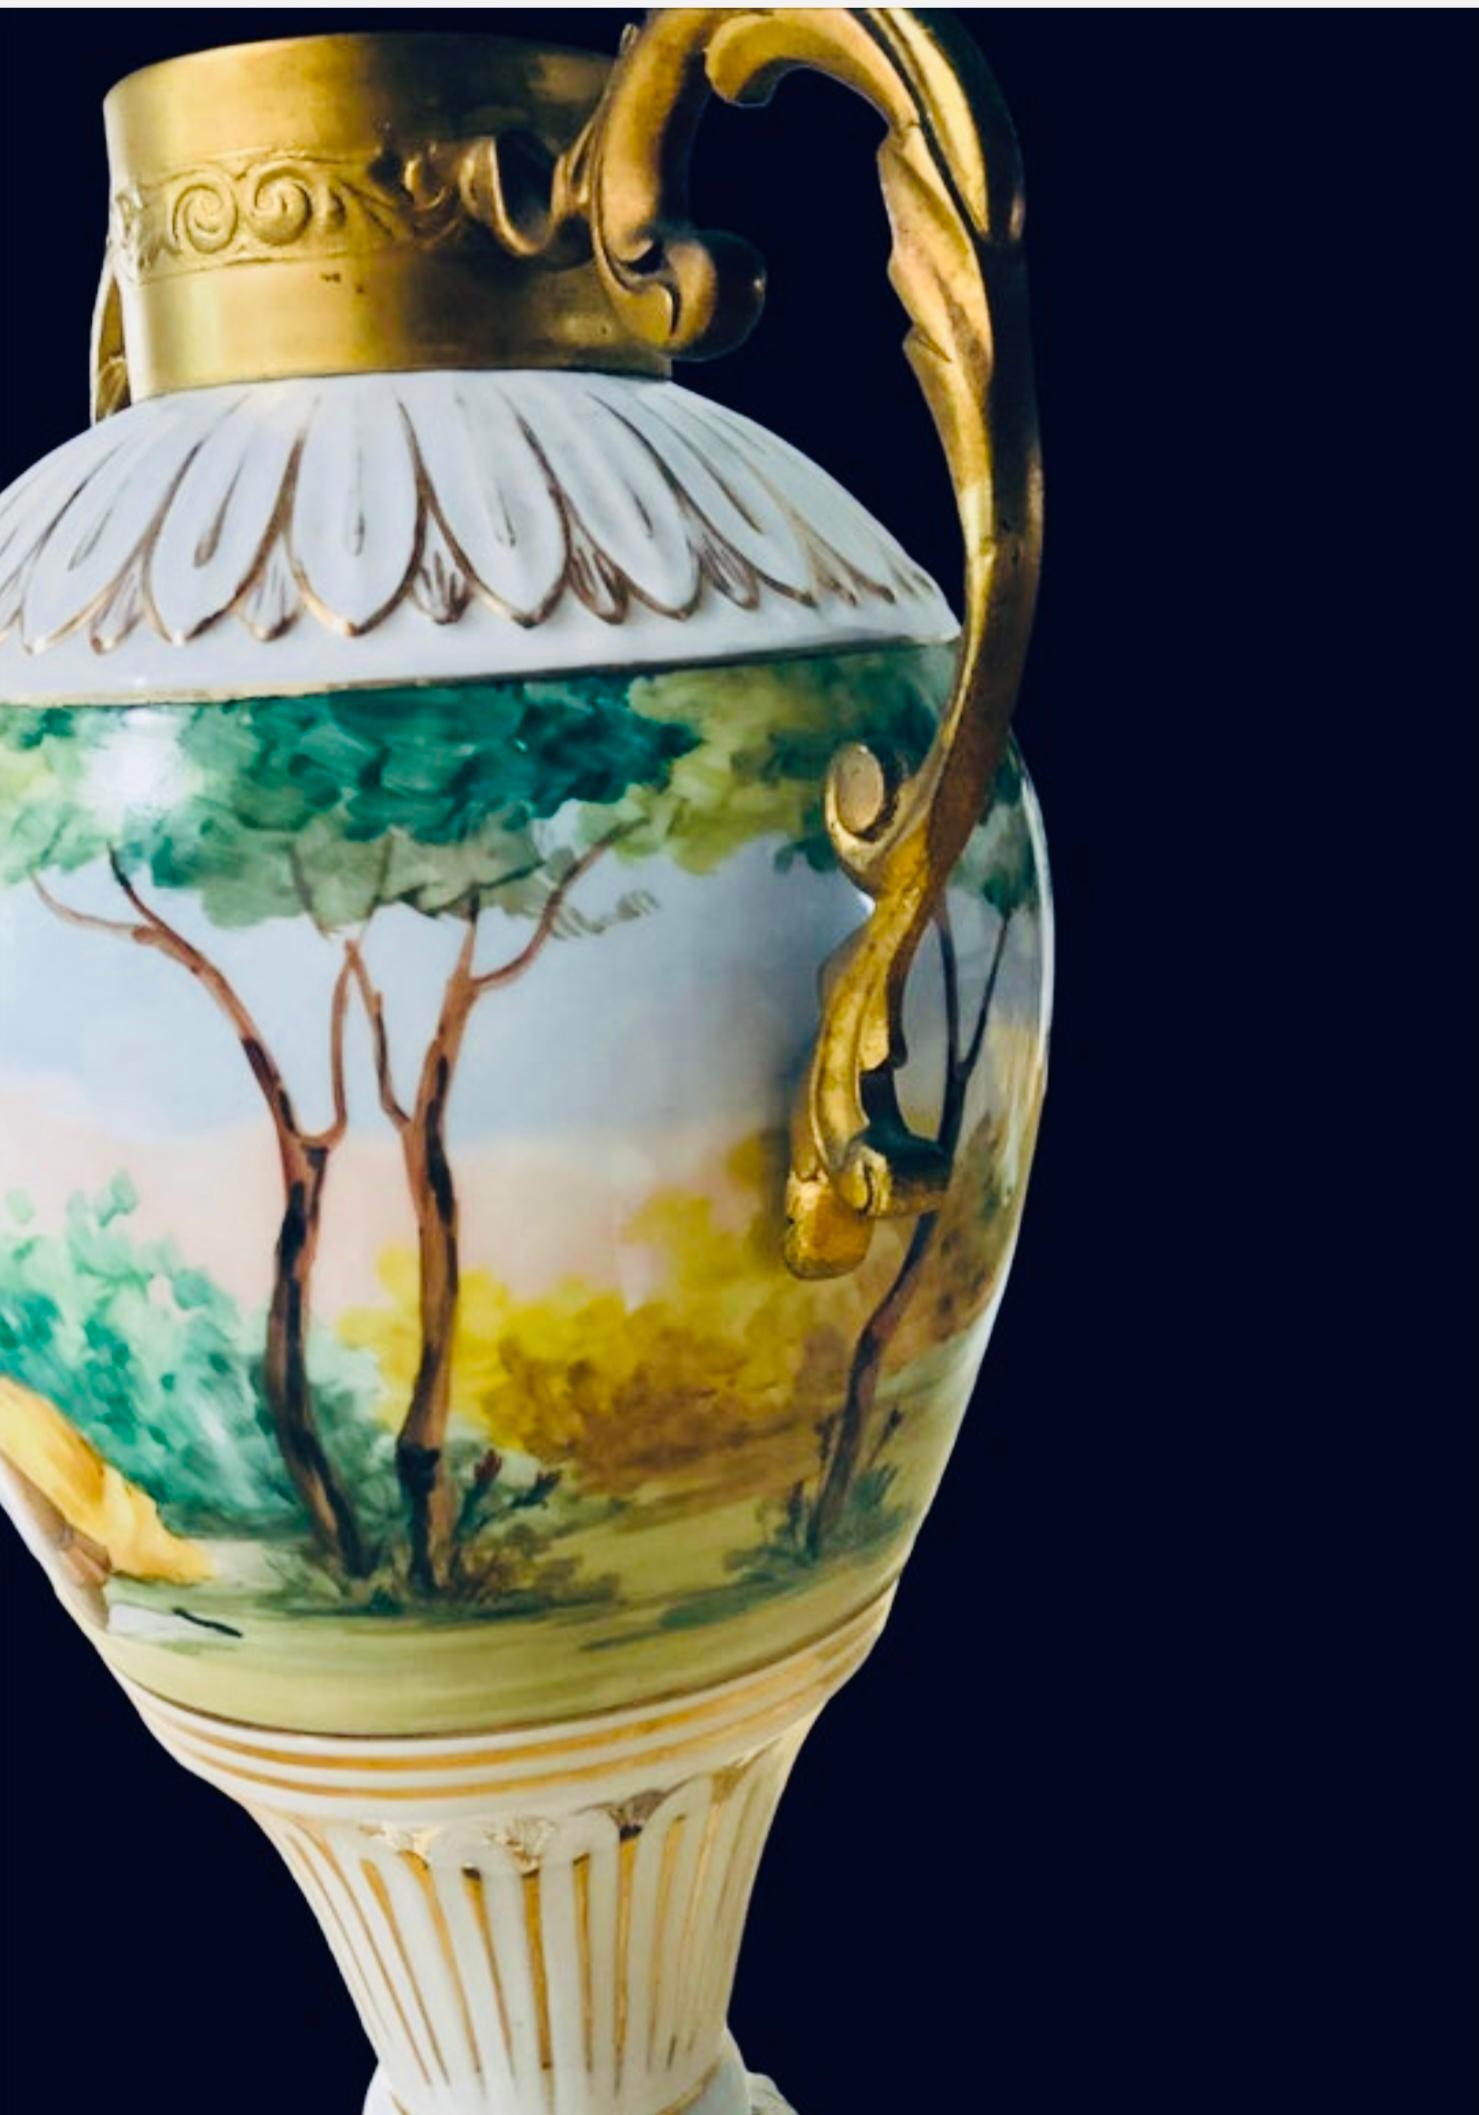 This is a heavy mounted gilt bronze porcelain urn. It is hand painted in the center of the body with a pastoral scene of a romantic couple seated and the gentleman is offering a bouquet of flowers to the lady. The other side depicts a scene of a